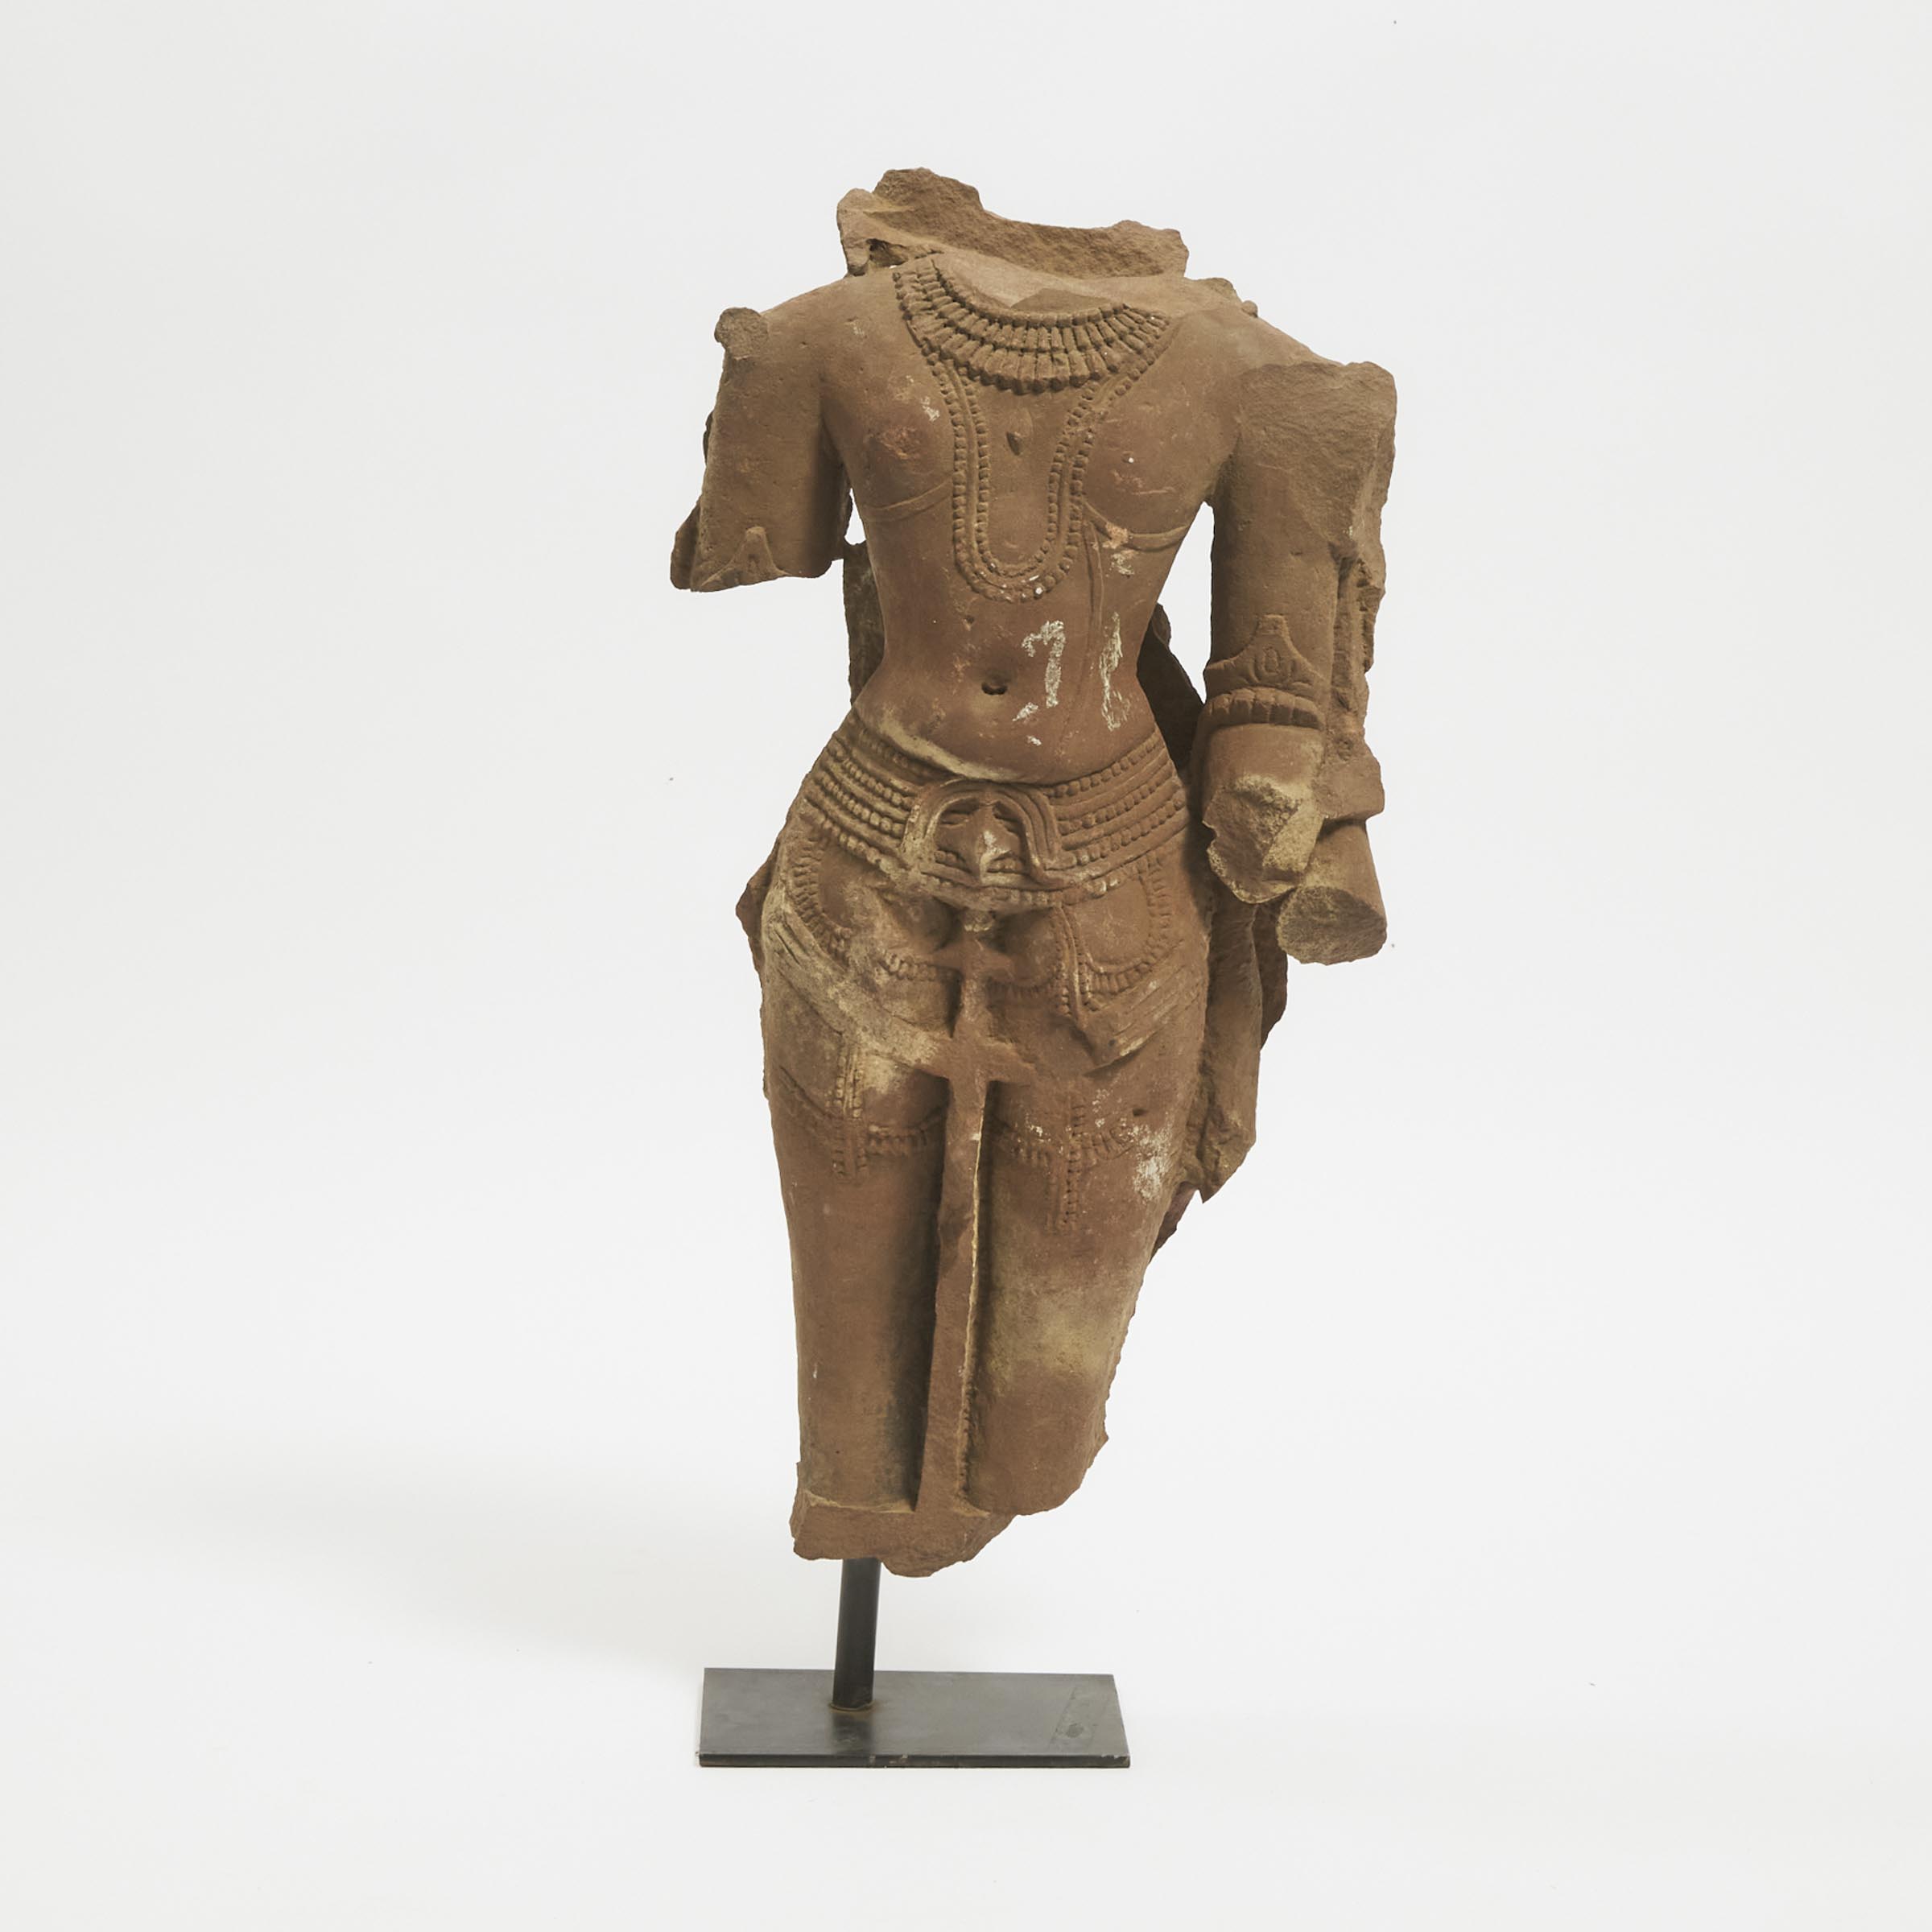 A Large Stone Torso of a Male Deity, India, 12th Century or Later